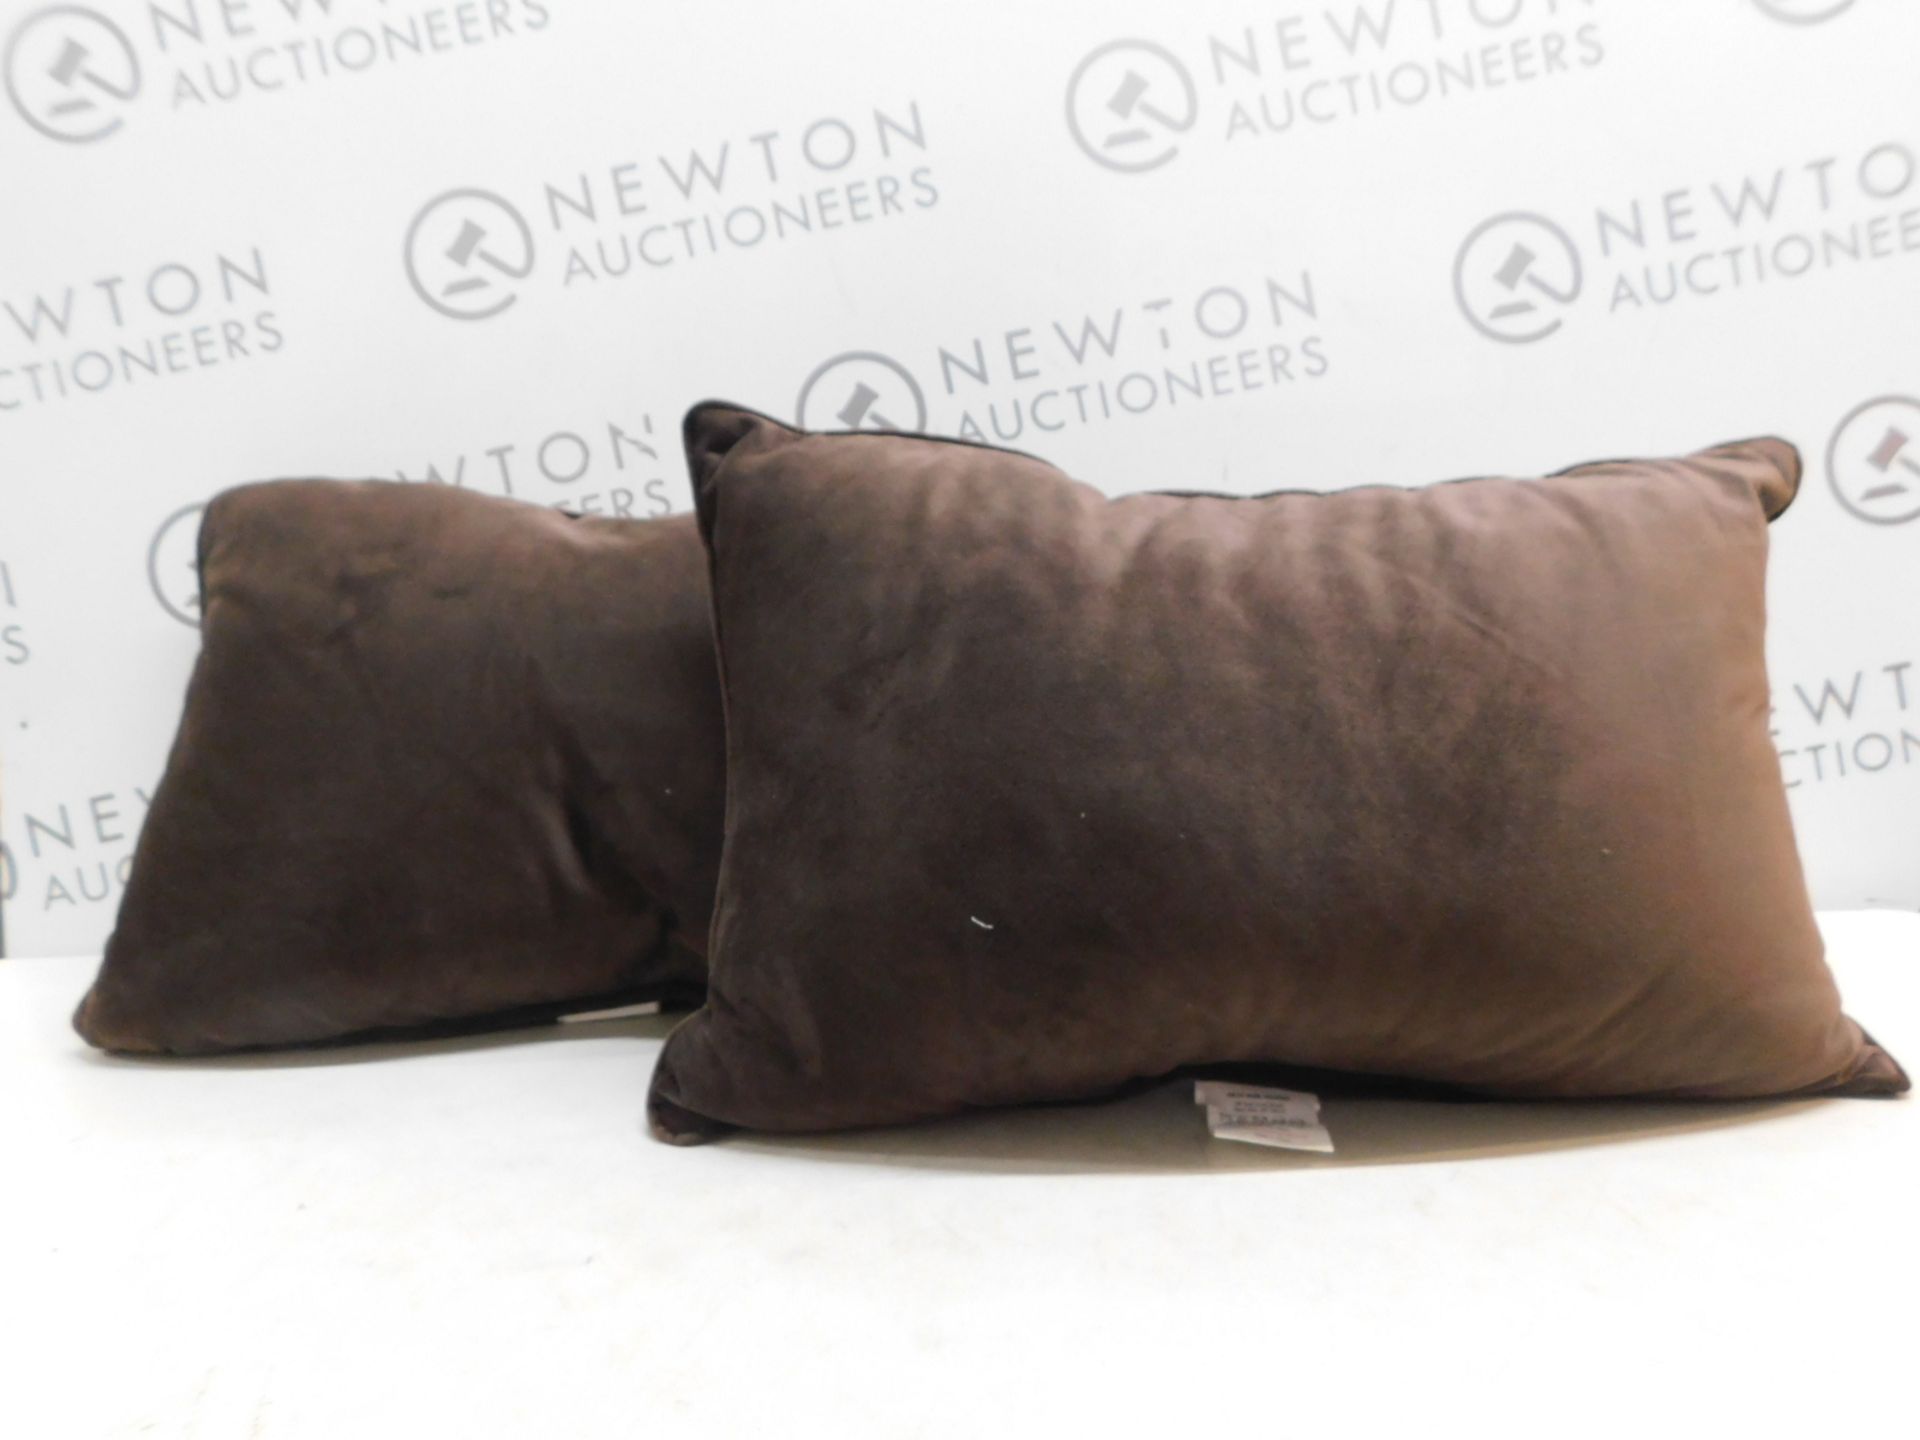 2 ARLEE HOME FASHIONS RECTANGLE VELVET LUXURIOUS BROWN REST SUPPORT CUSHIONS RRP Â£12.99